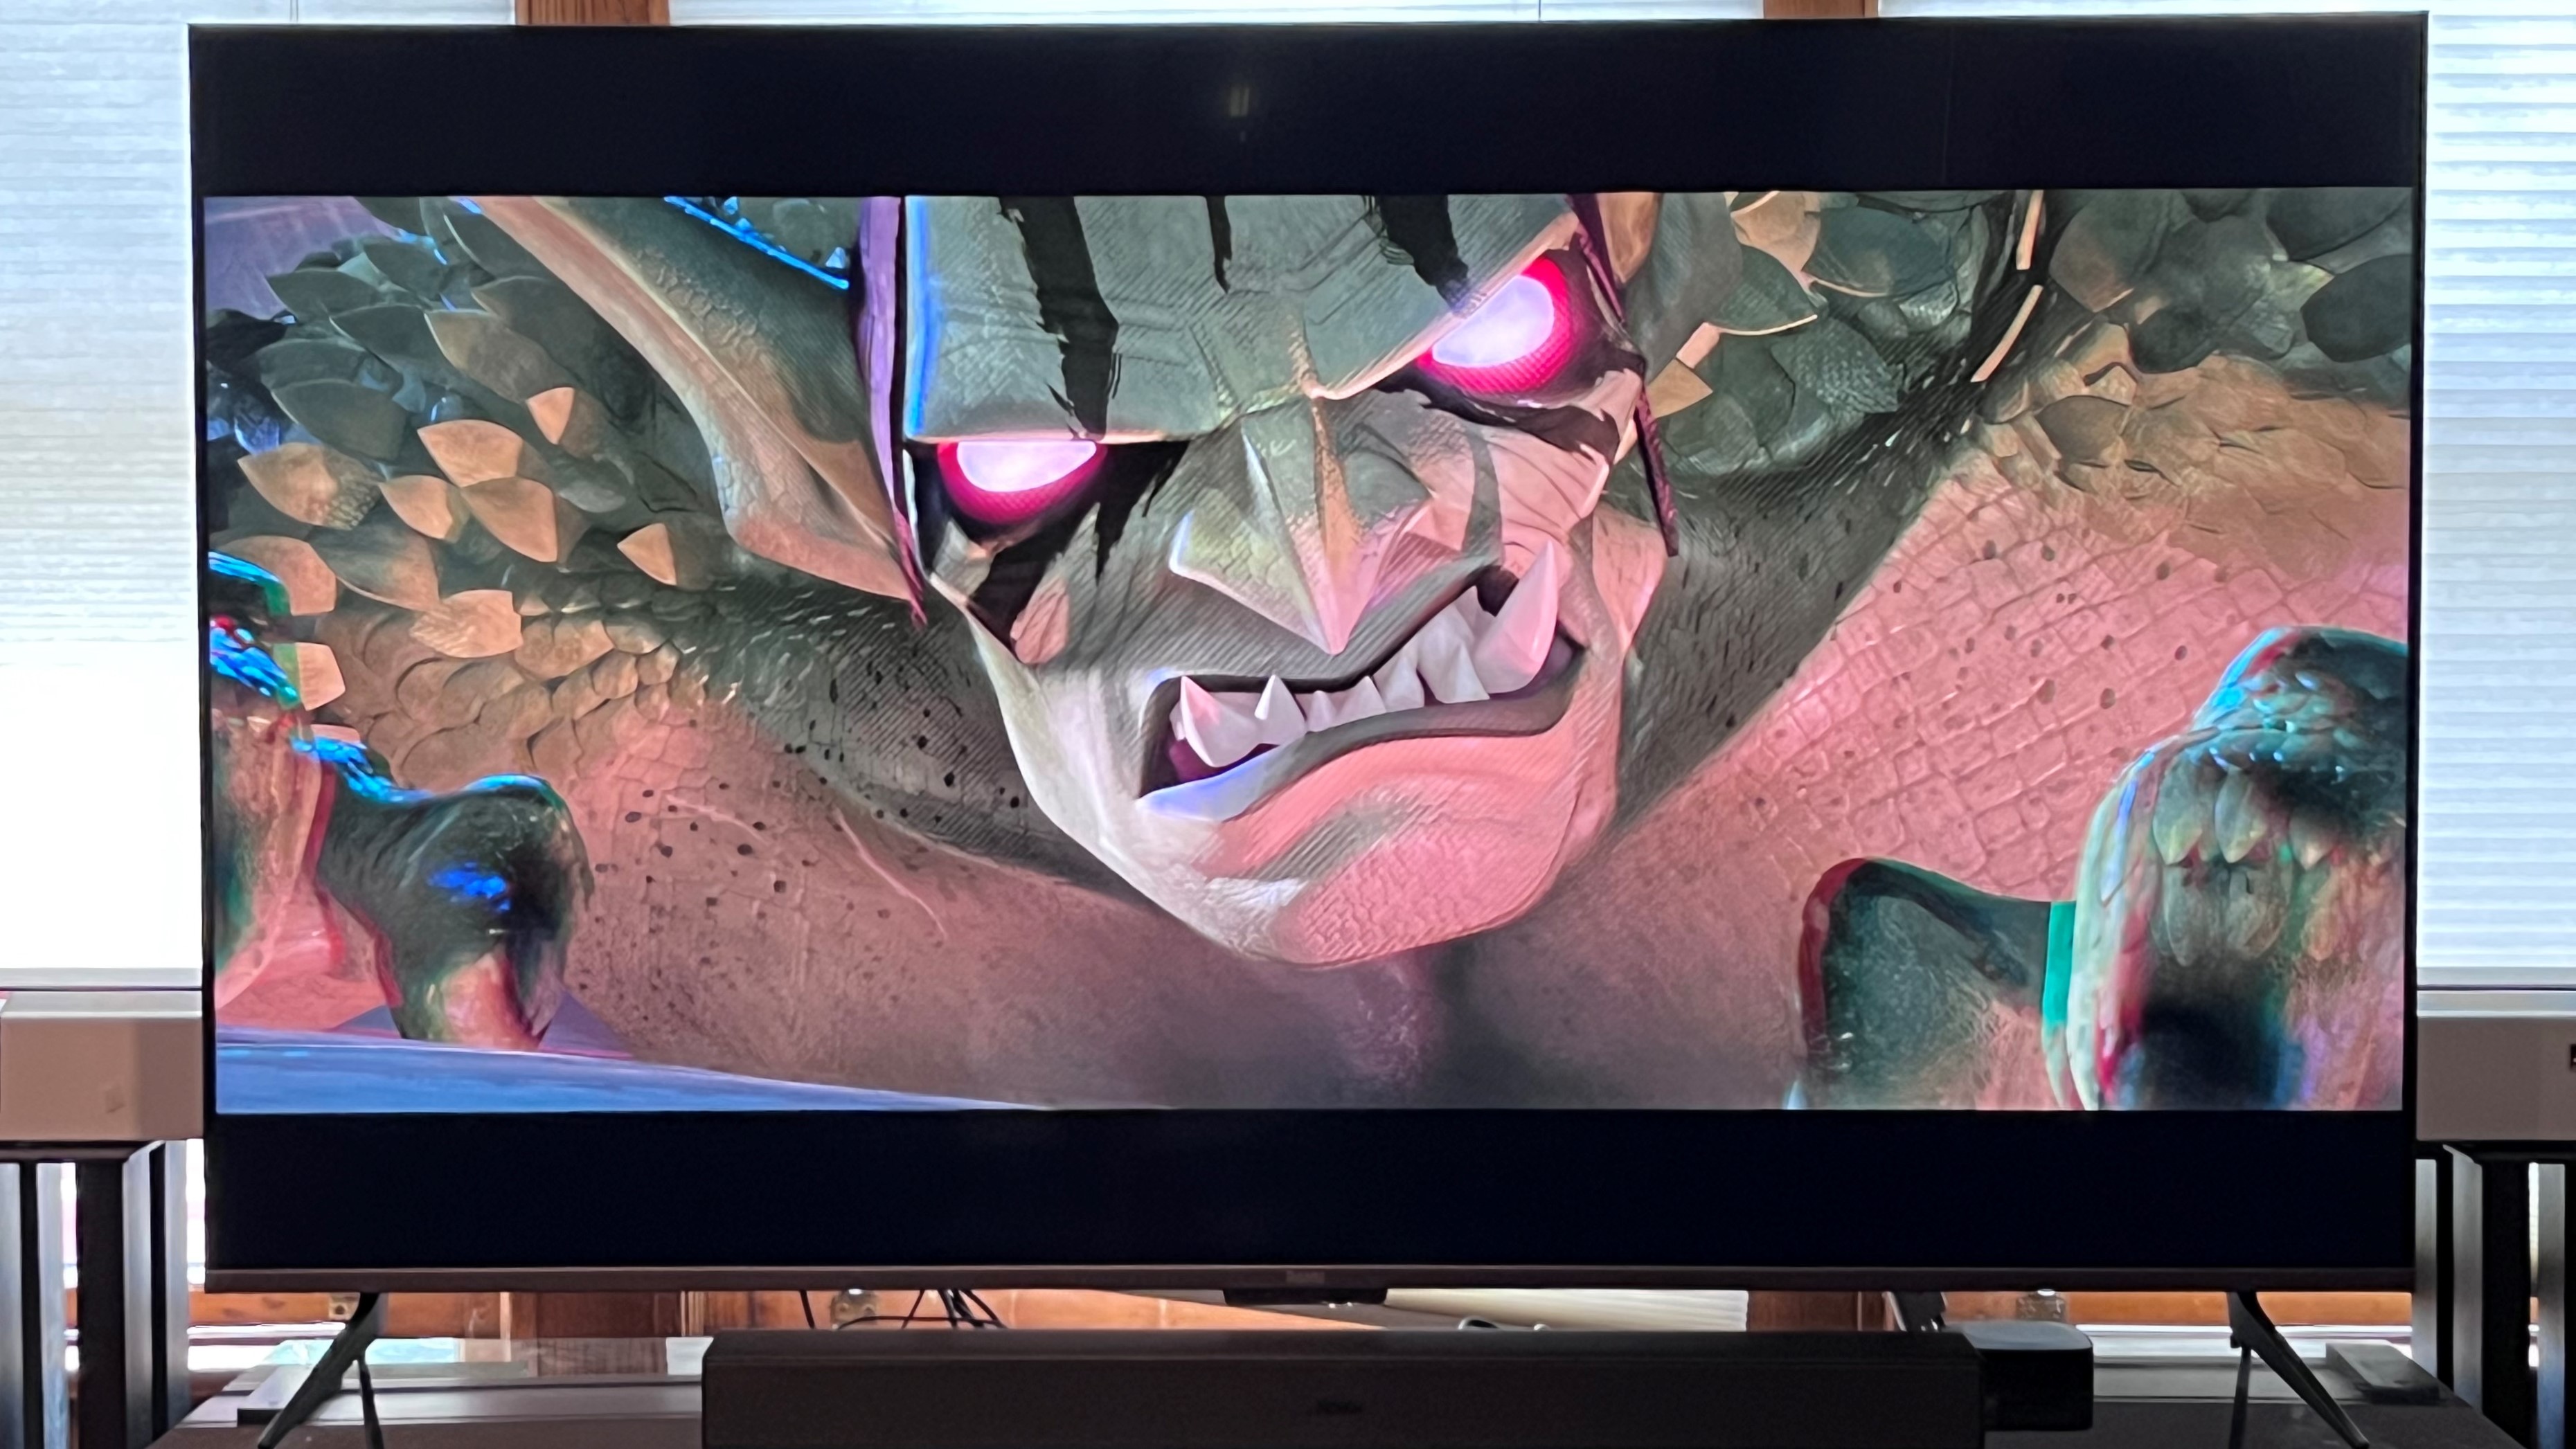 Roku Plus Series TV showing image from Spider-Man: Into the Spider-verse onscreen